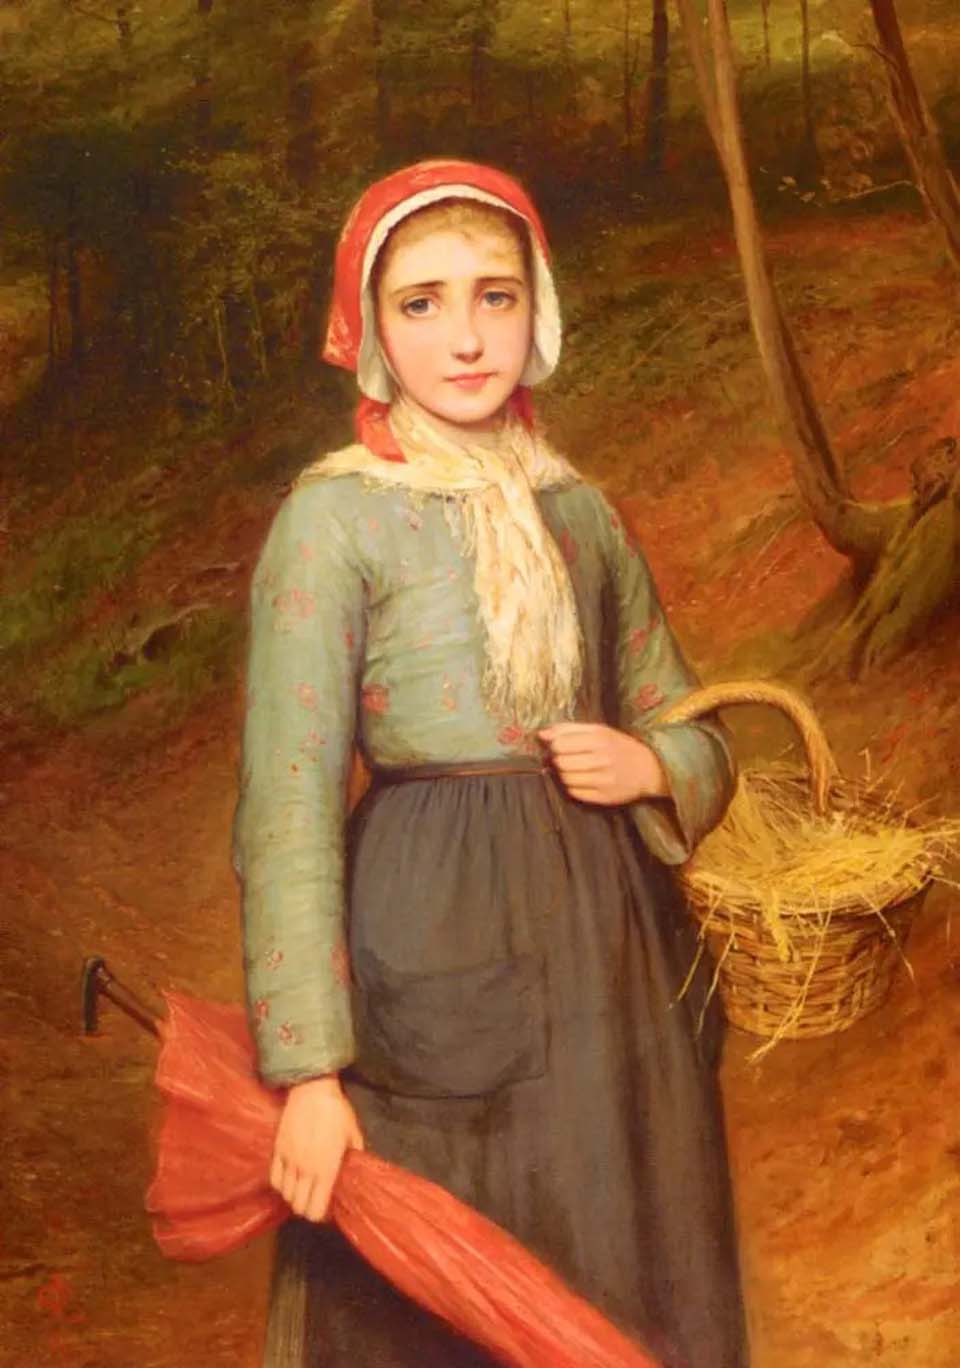 A Berkshire cottage girl